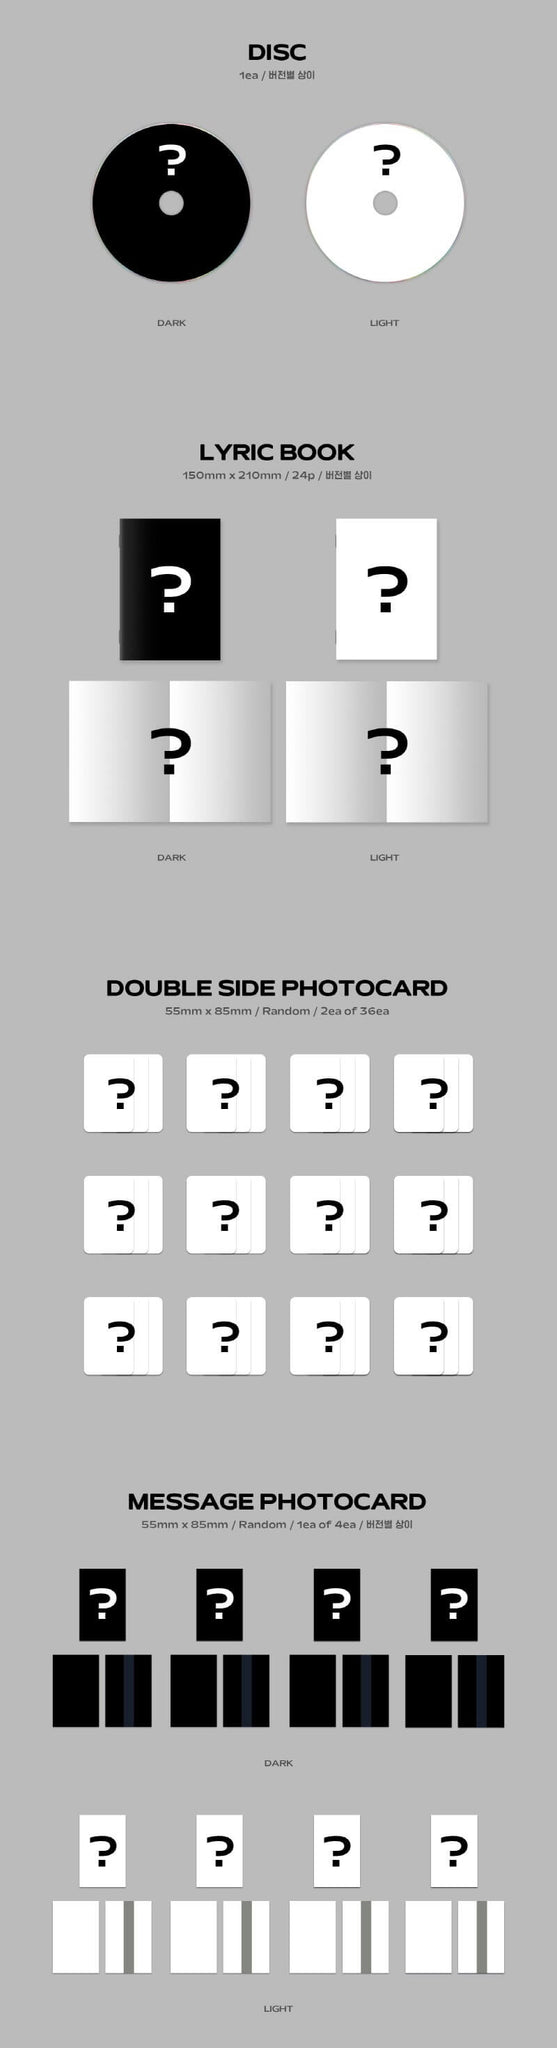 AB6IX THE FUTURE IS OURS : LOST Inclusions Disc Lyric Book Double Side Photocard Message Photocard